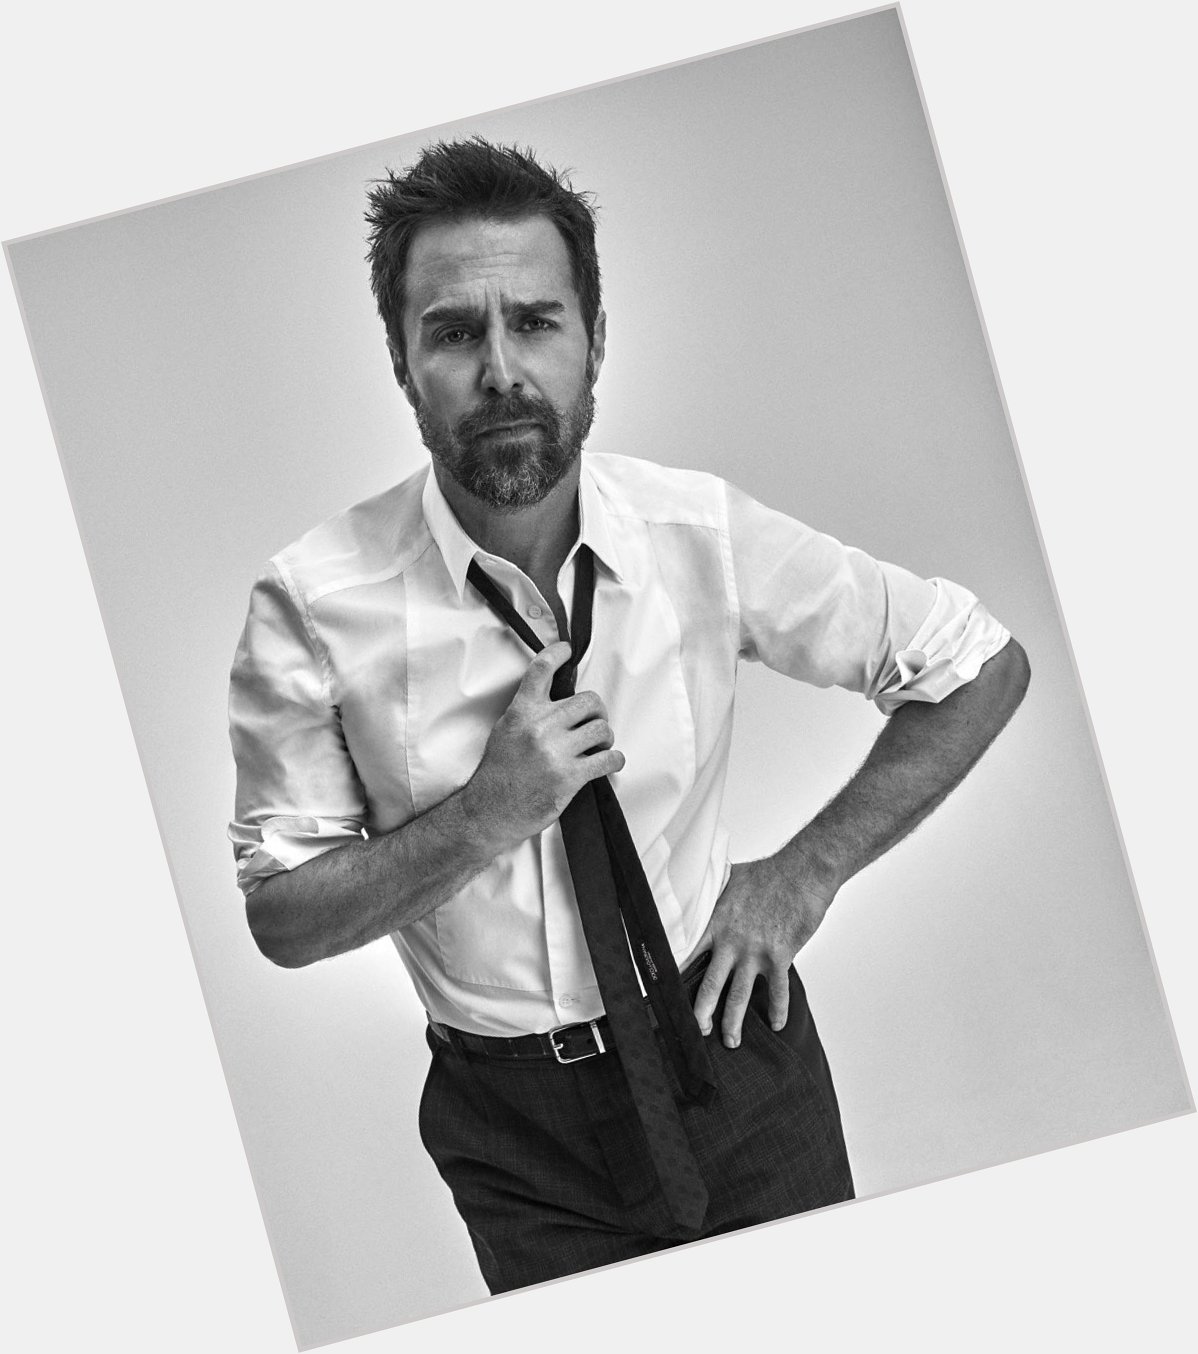 A very happy Sam Rockwell s birthday to you  